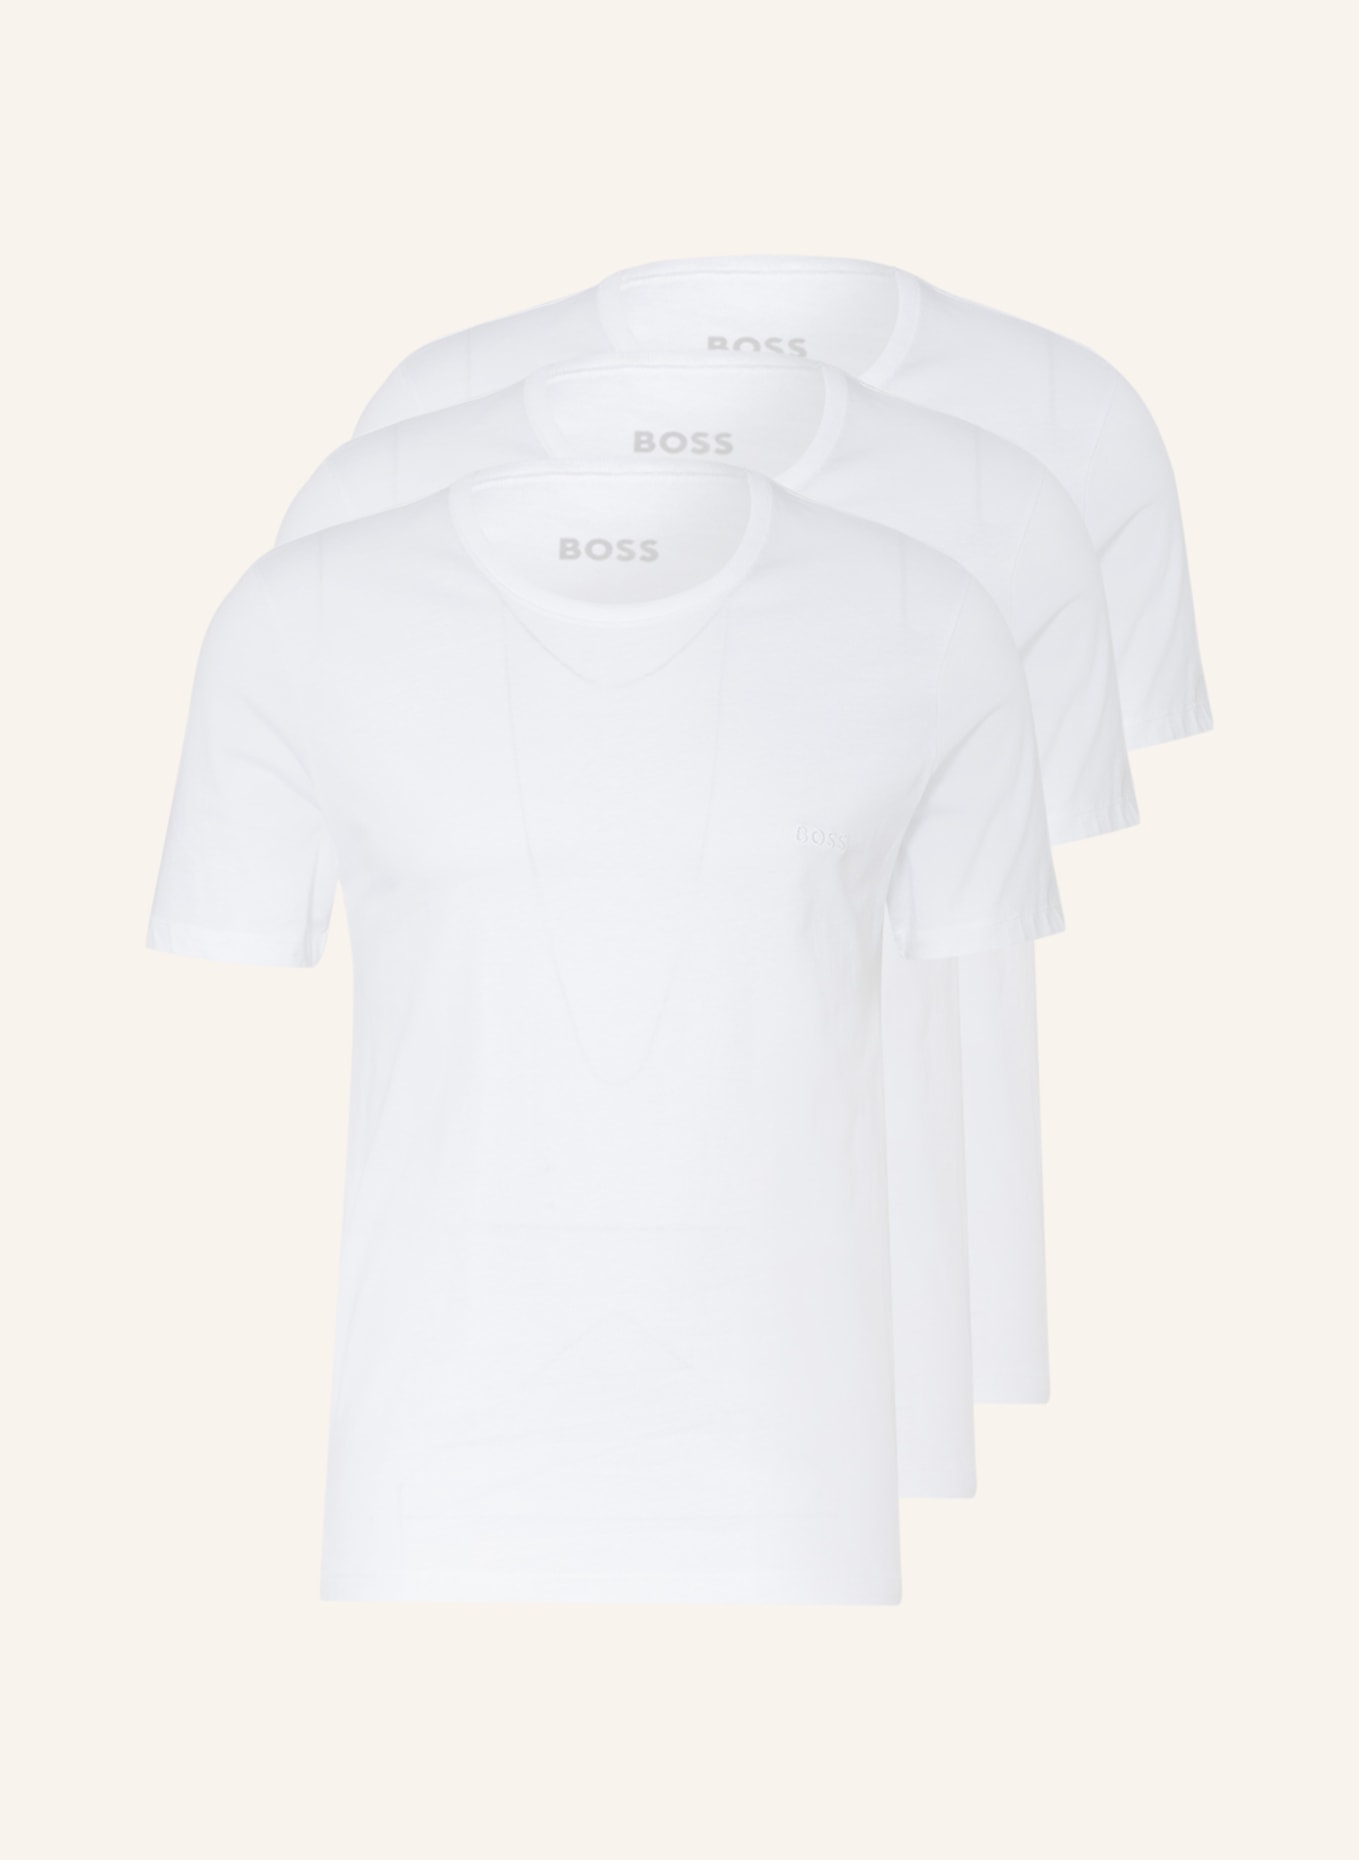 BOSS 3-pack T-shirts, Color: WHITE (Image 1)